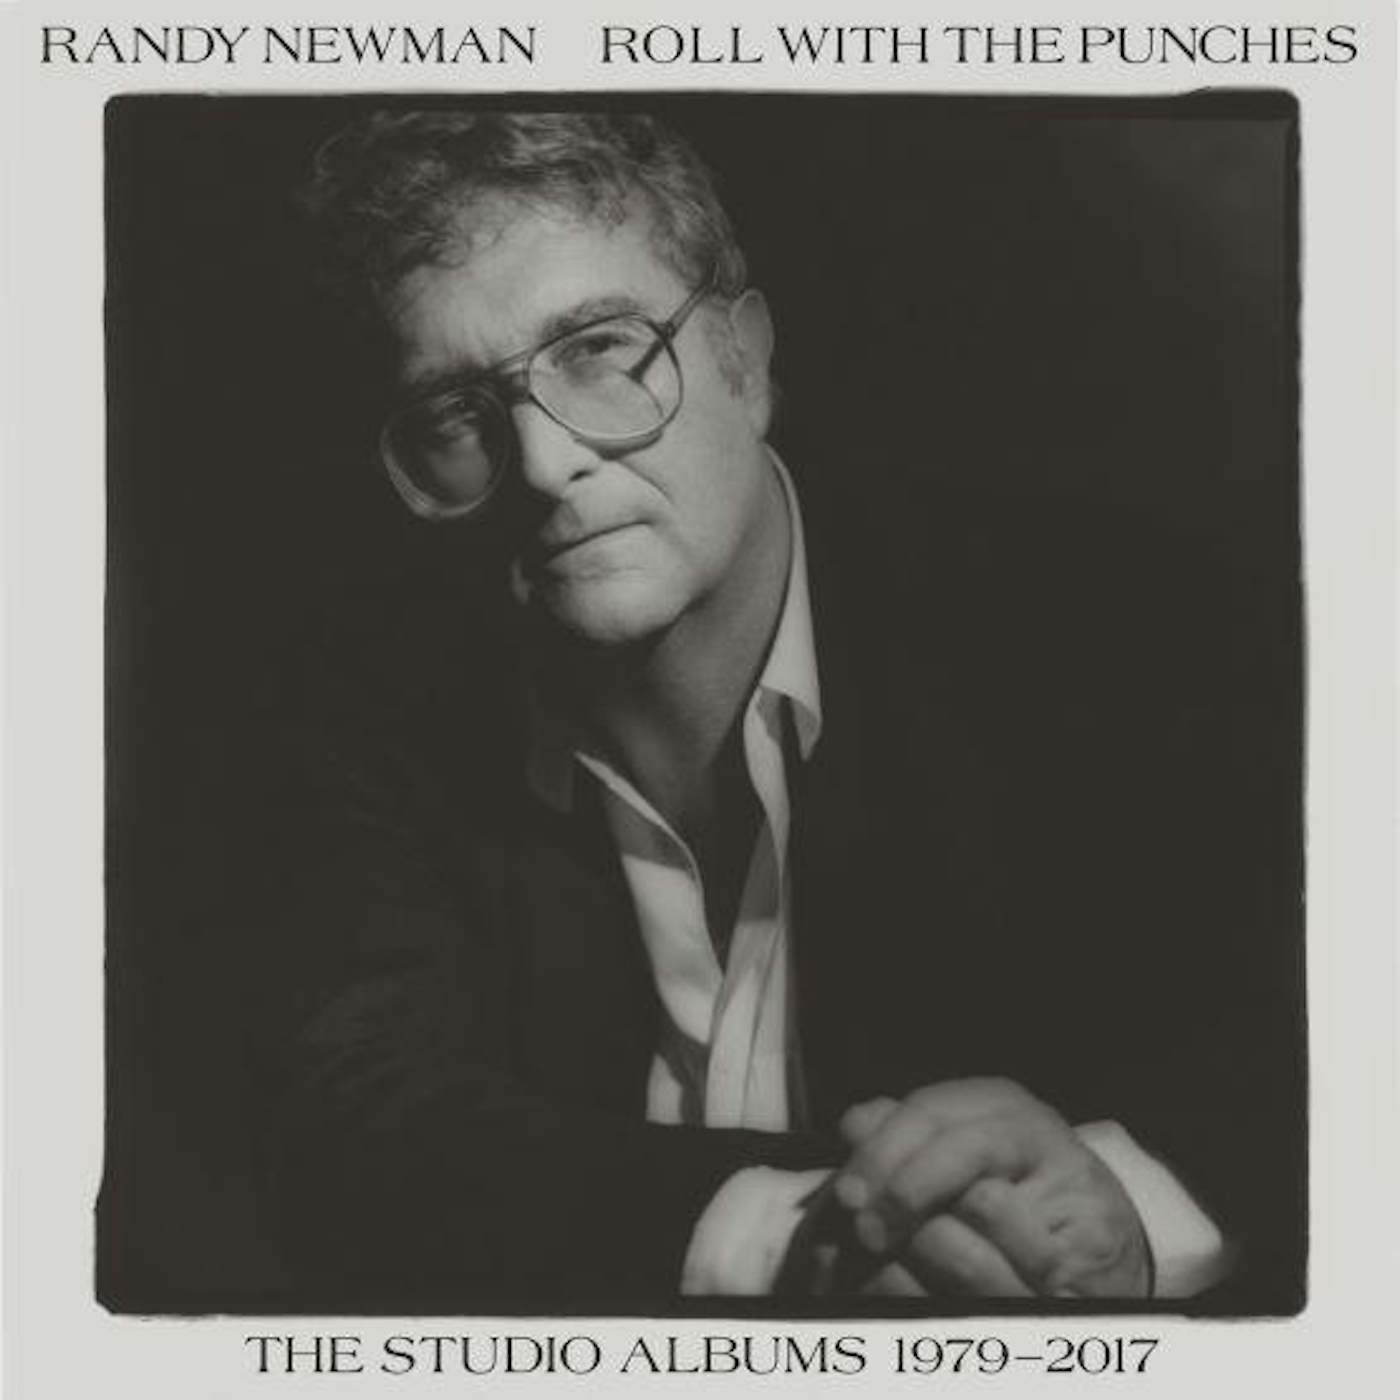 Randy Newman ROLL WITH THE PUNCHES: THE STUDIO ALBUMS (1979-2017) (X) (8LP) (RSD) Vinyl Record